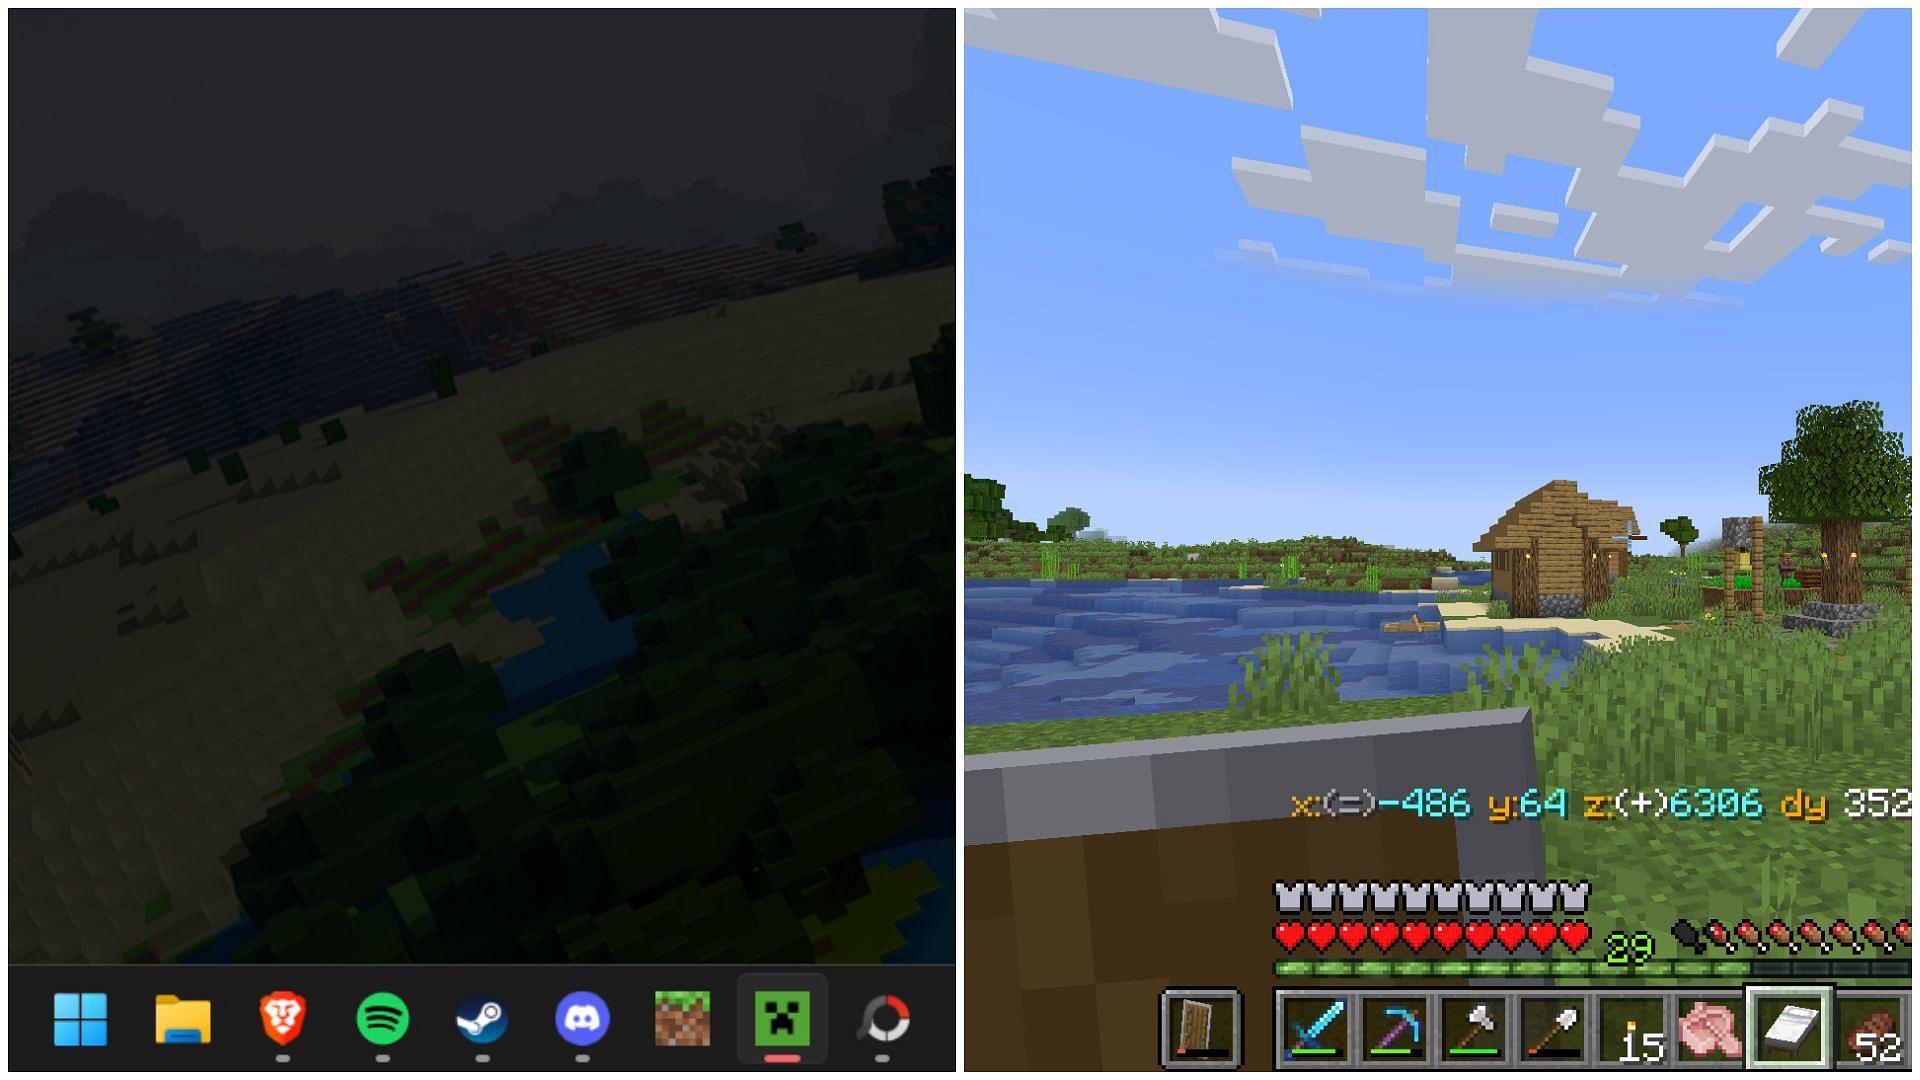 Top 7 reasons why Minecraft is lagging on a device